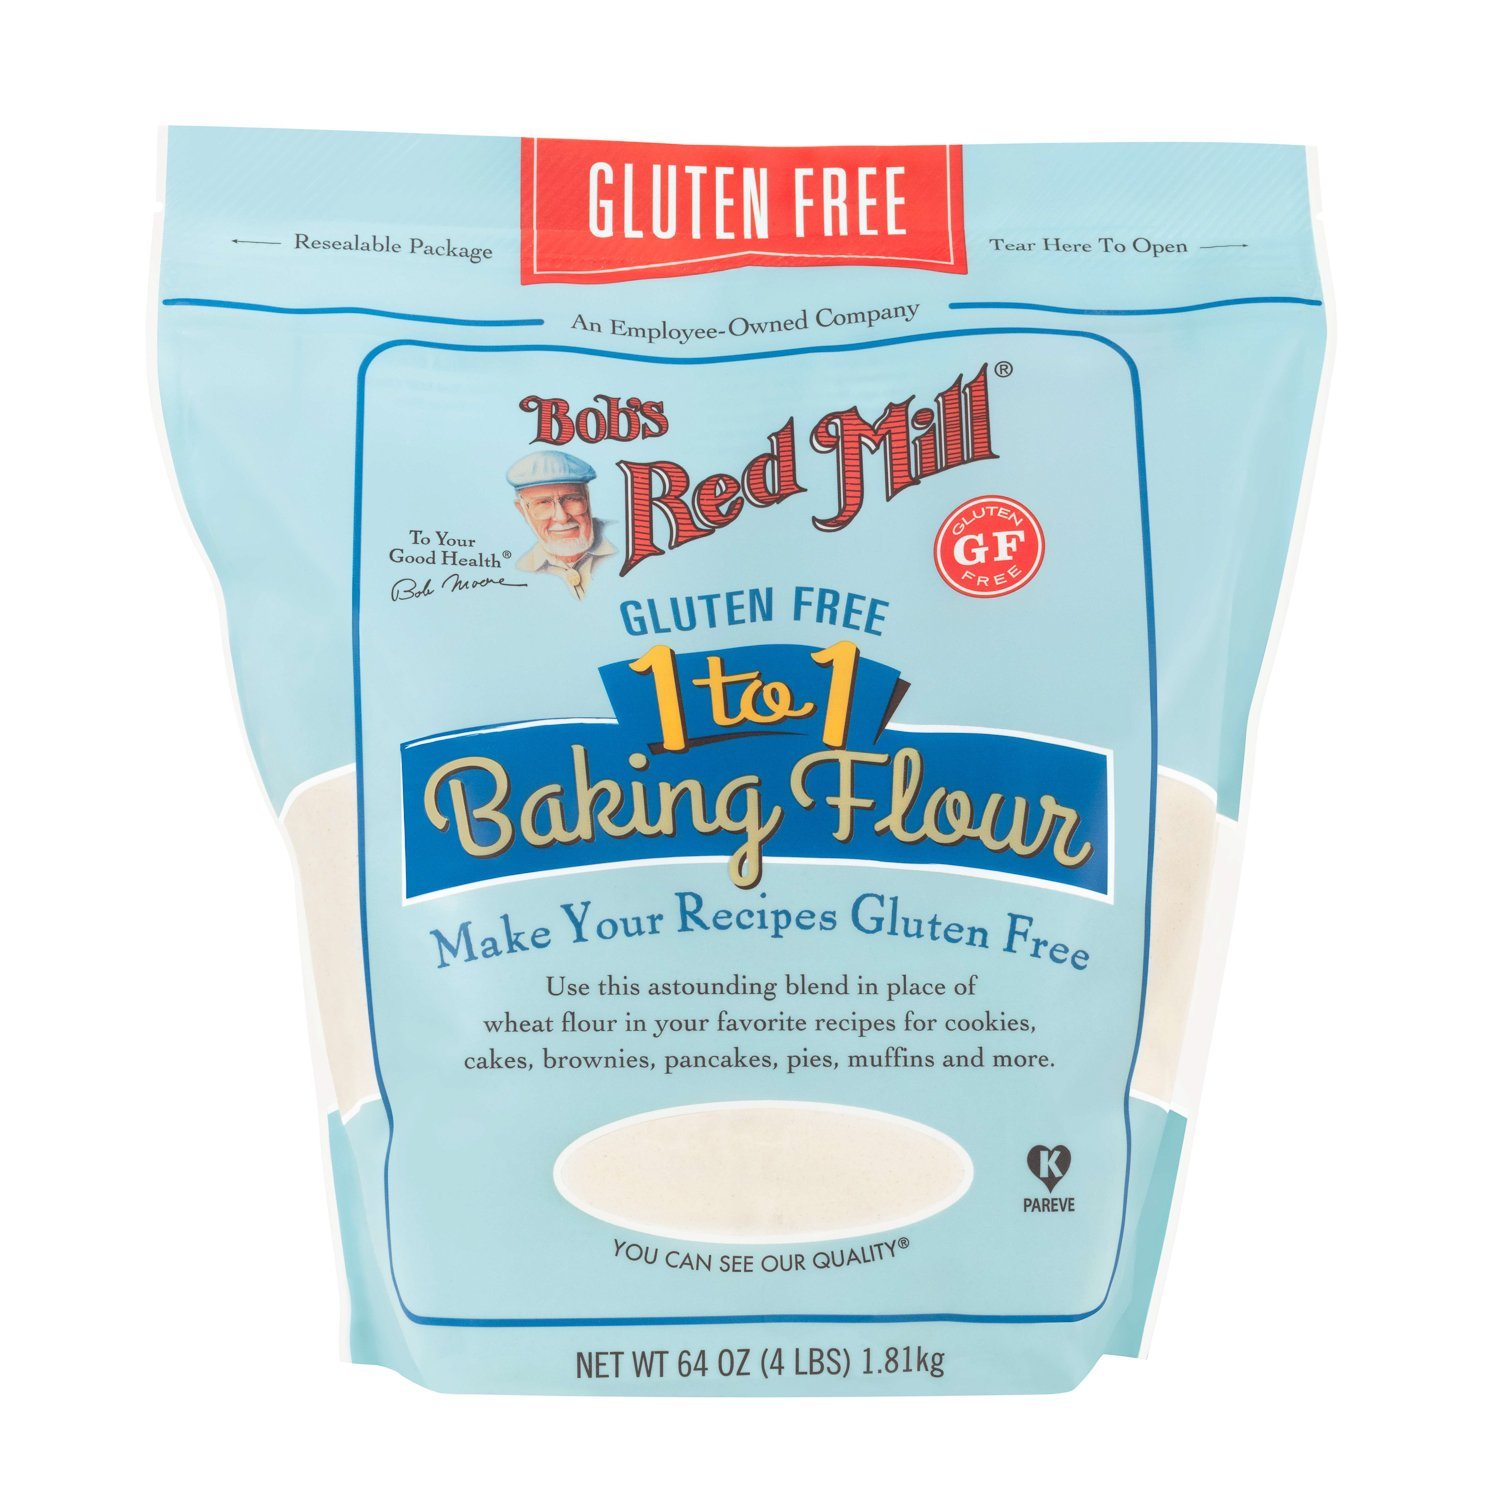 Bob's Red Mill Gluten Free 1-to-1 Baking Flour Bob's Red Mill 44 Ounce 